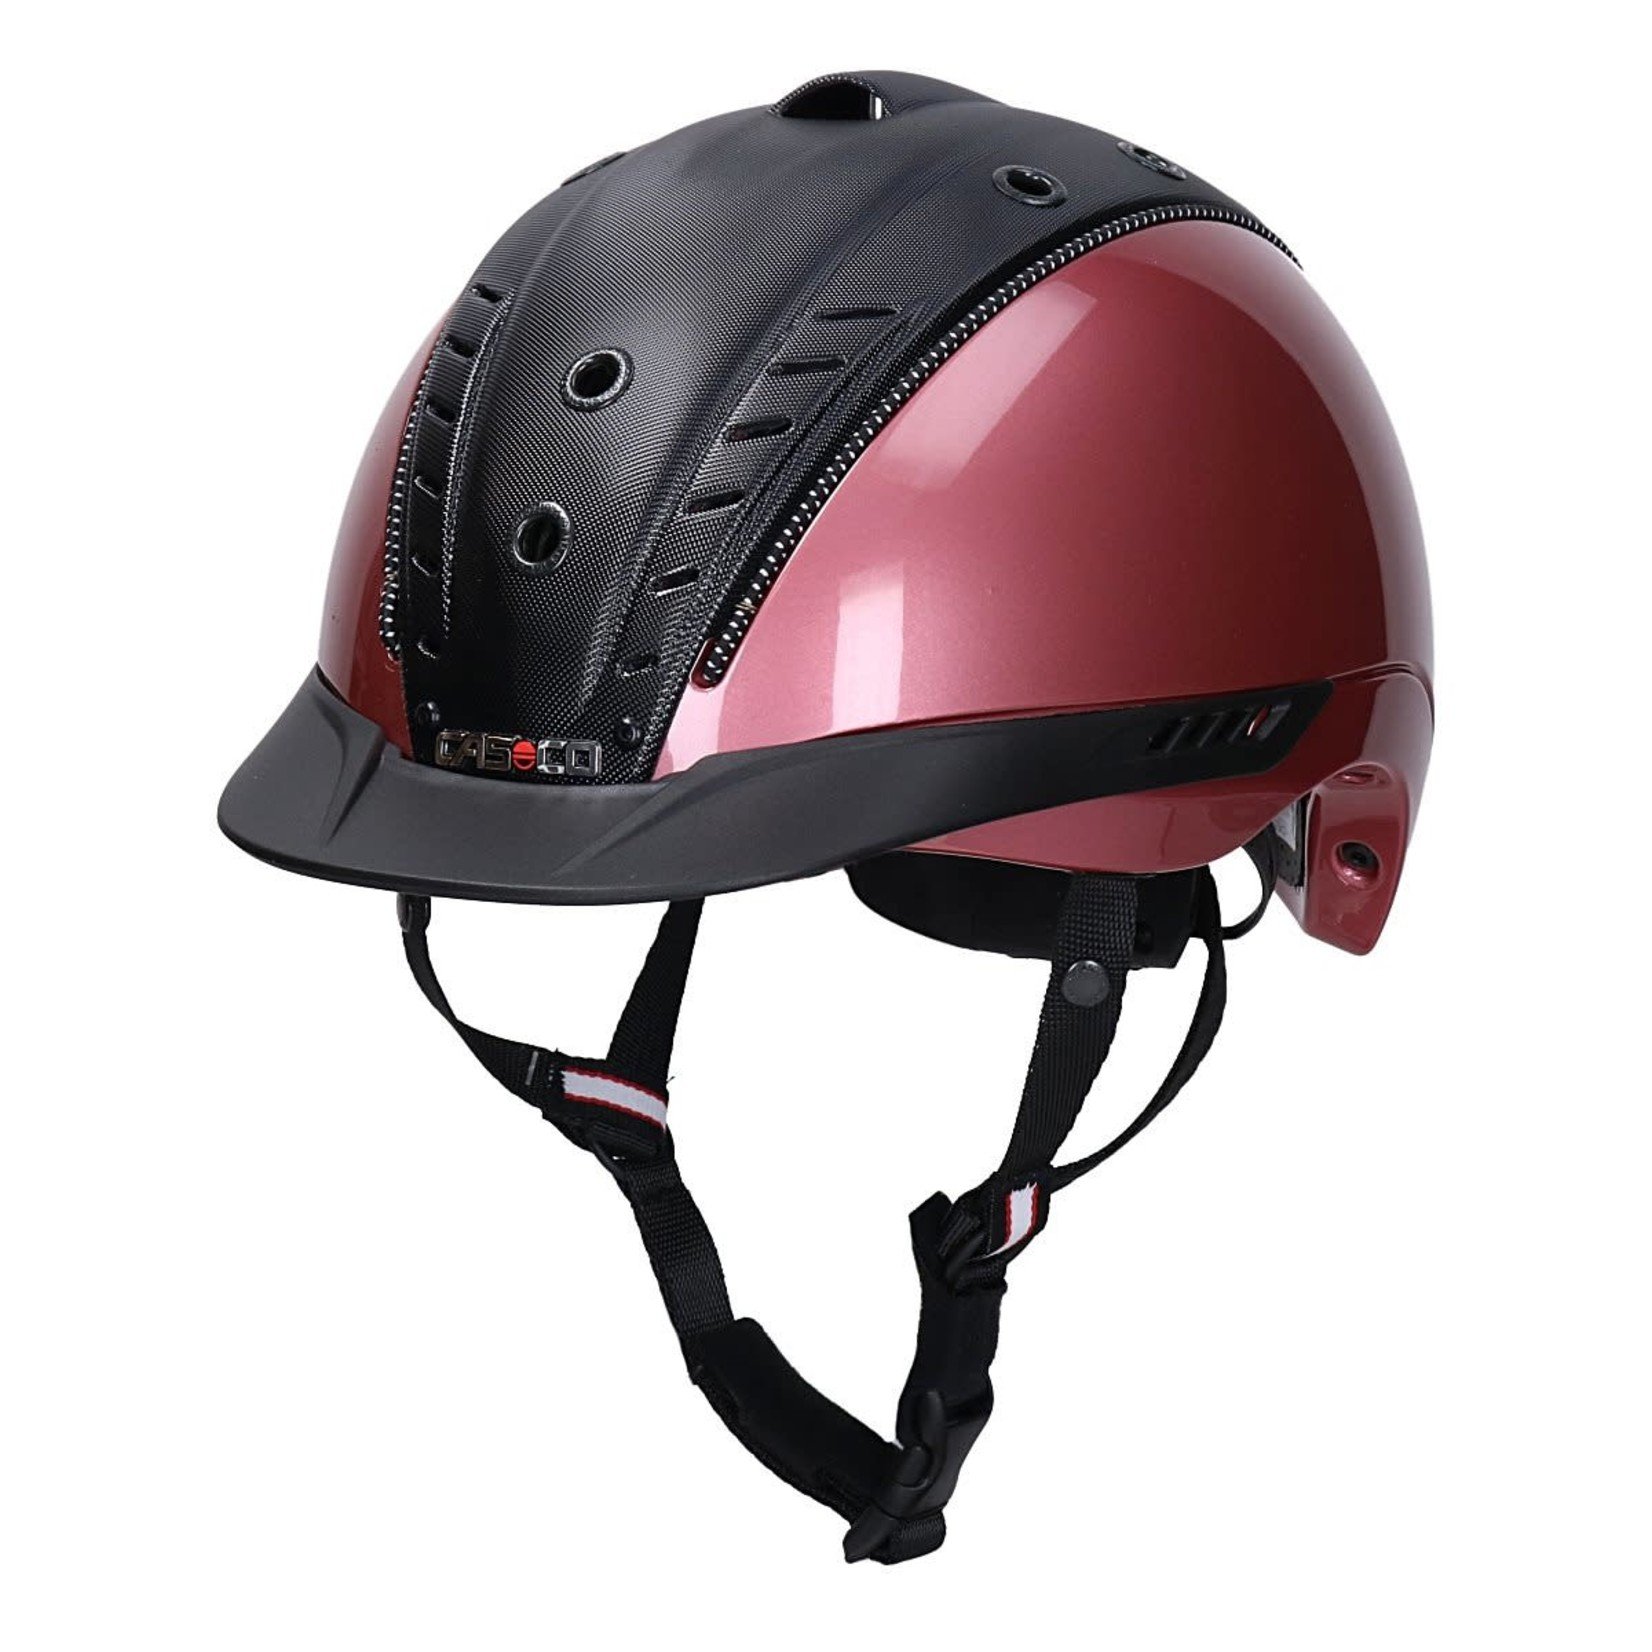 Casco Casco Mistrall-2 Limited Edition, English rose